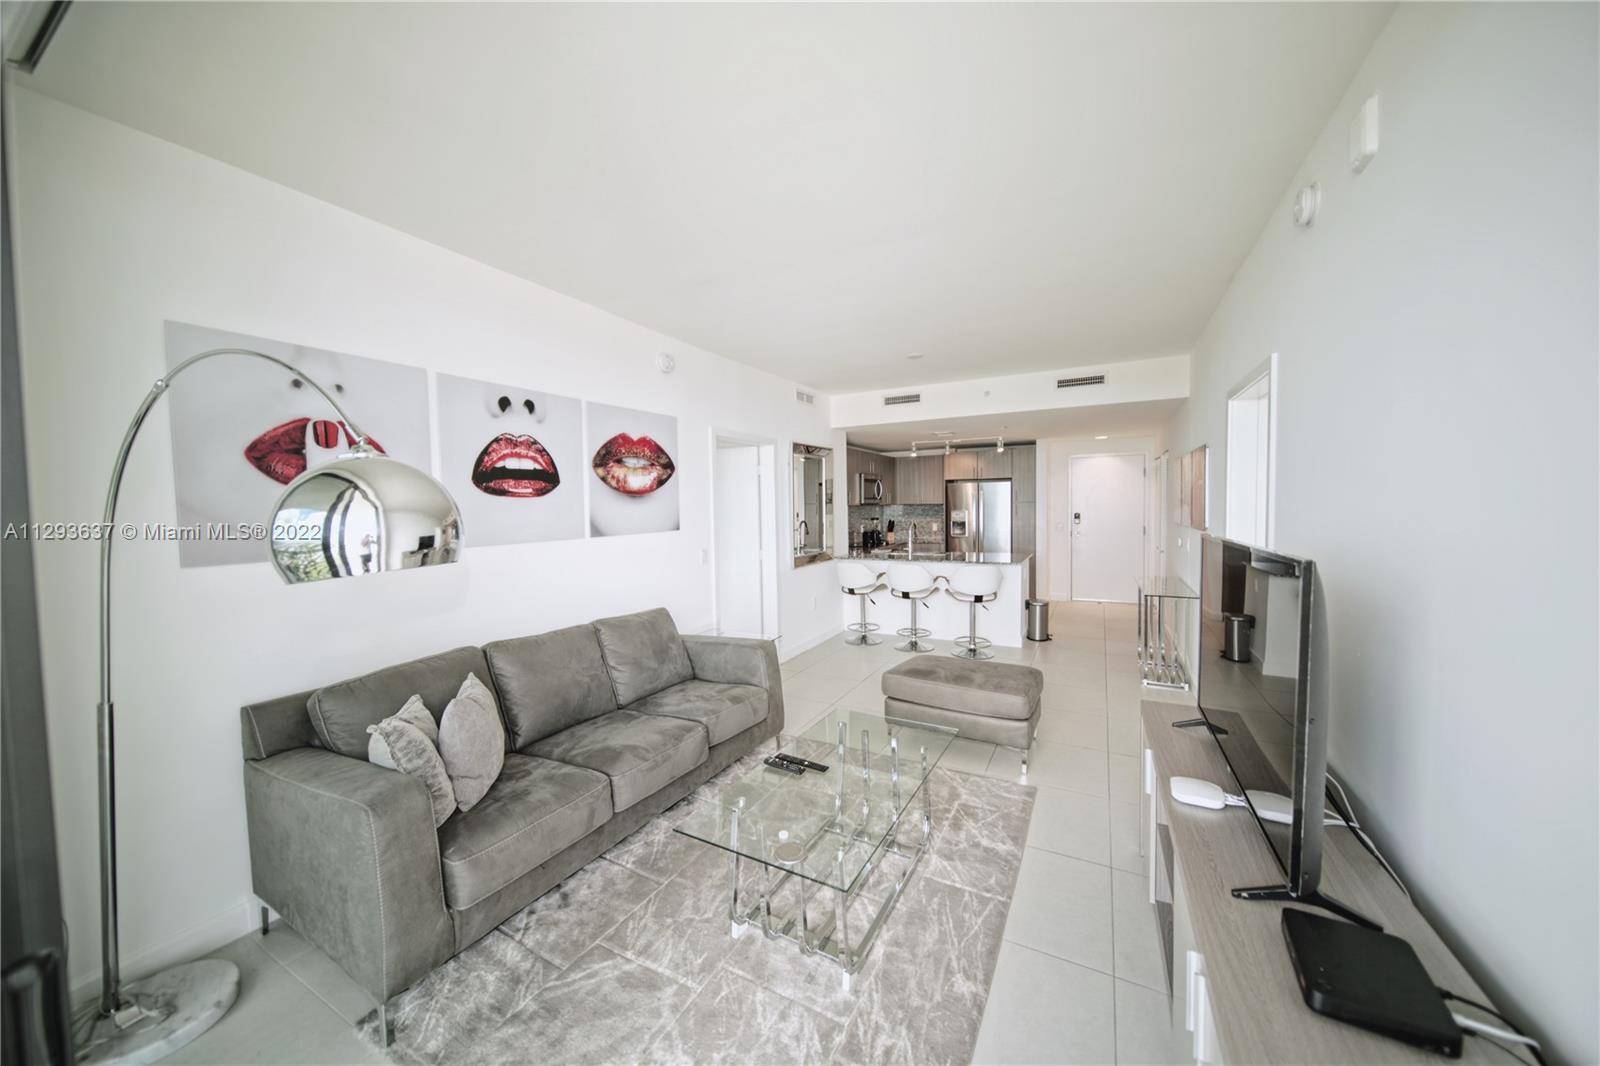 Spectacular apartment in the best area of Doral furnished with excellent taste, everything you need for a dream lifestyle, gym, restaurant, shops, etc.